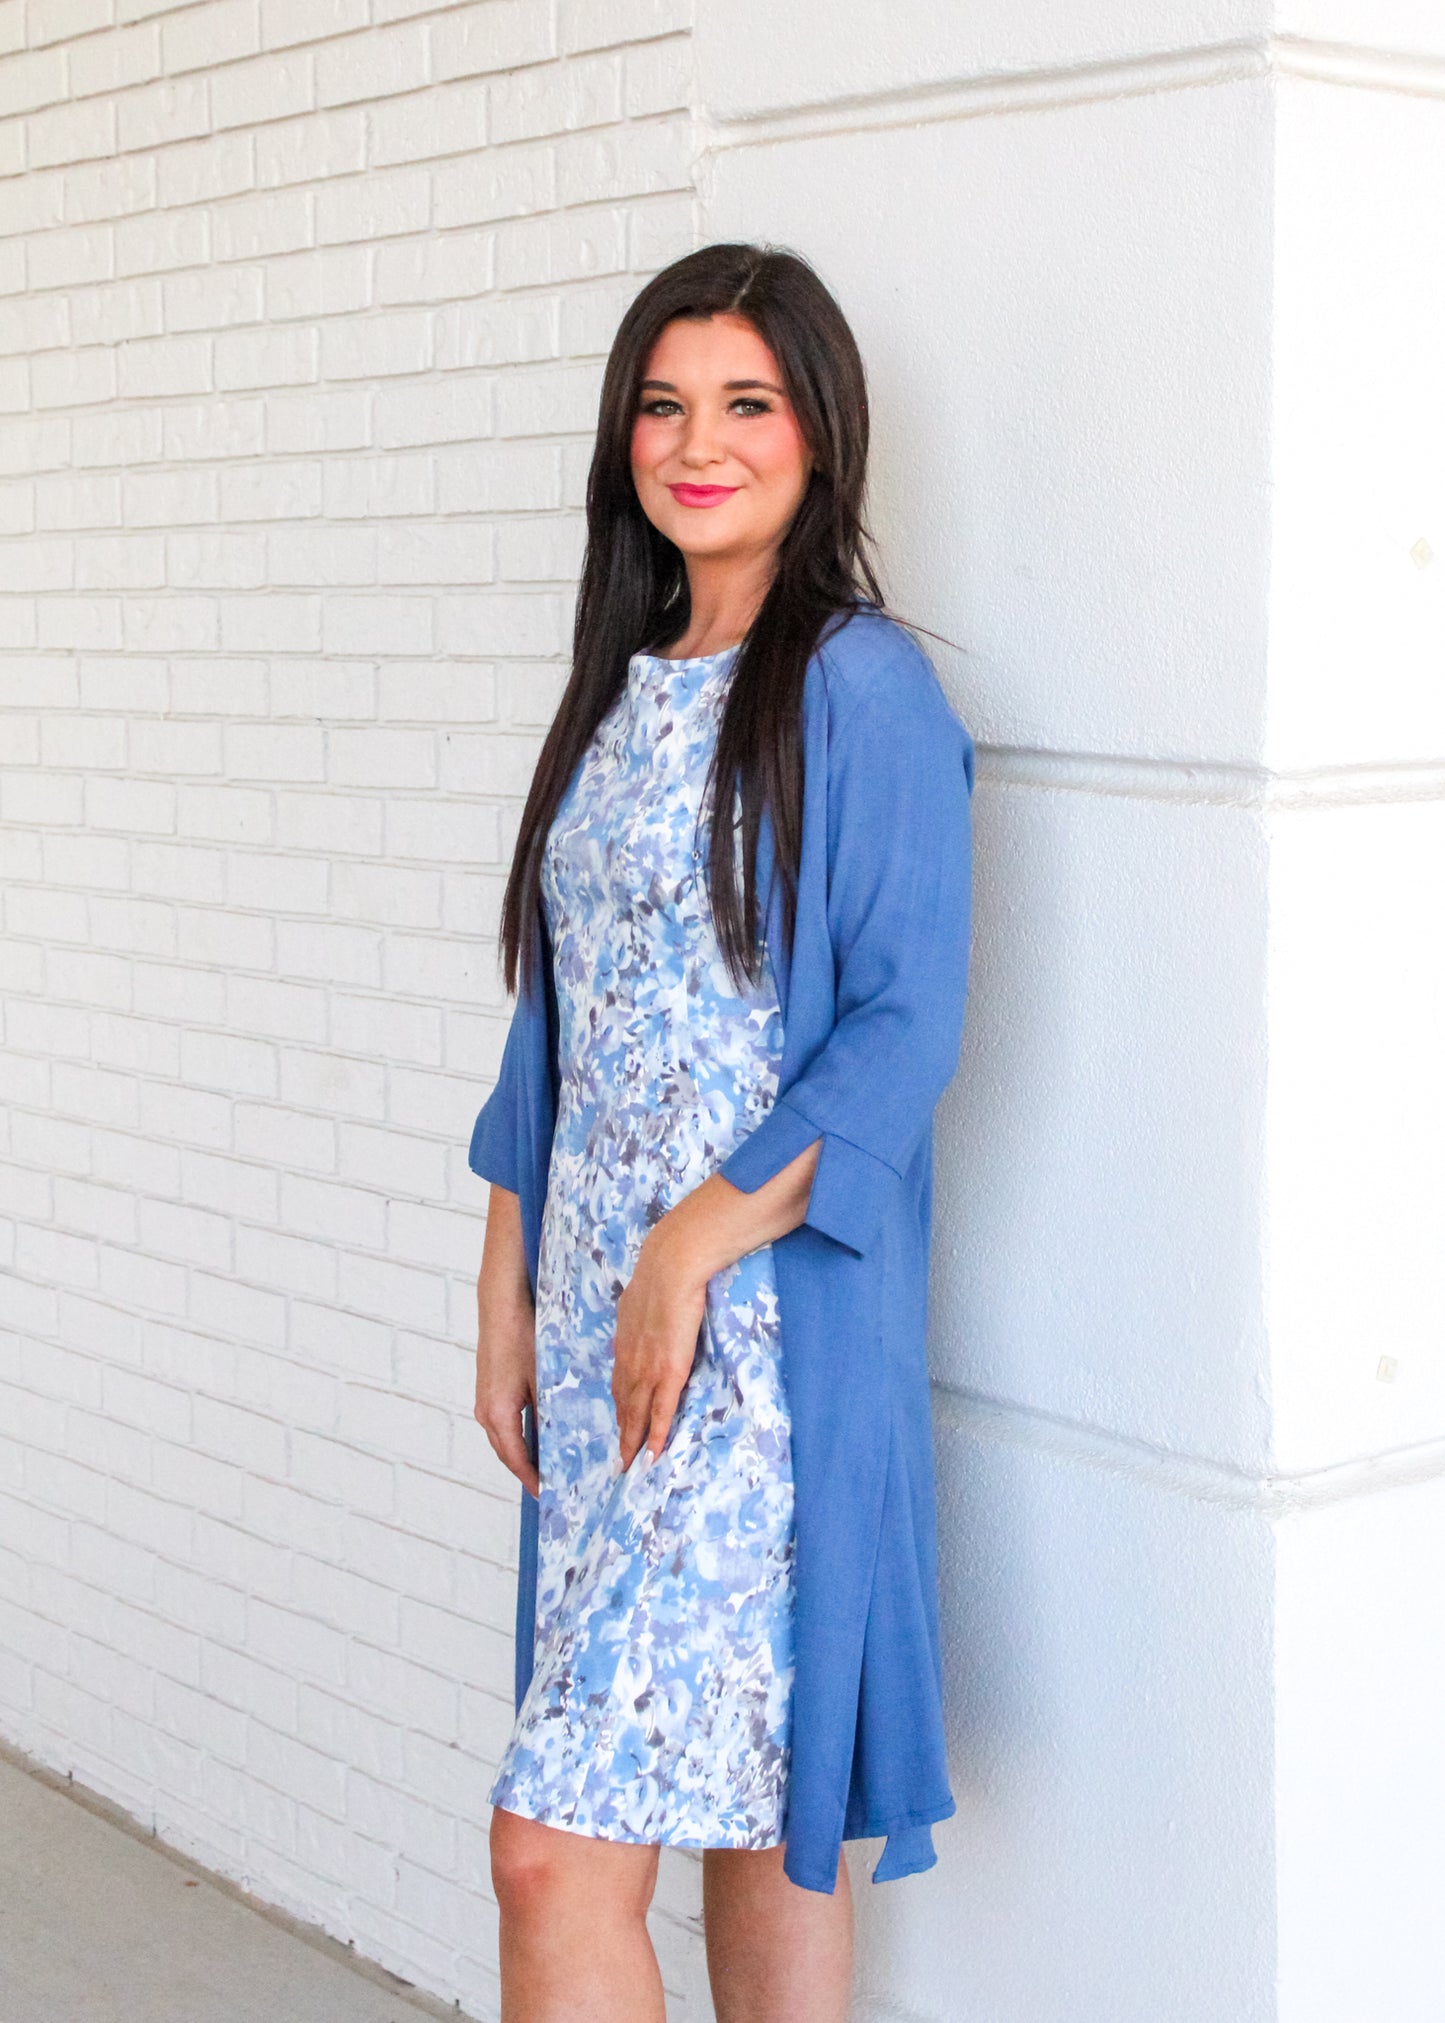 The model is showing the Maggie Sleeveless Dress with the 3/4 Sleeve Long Cardigan in Blue.